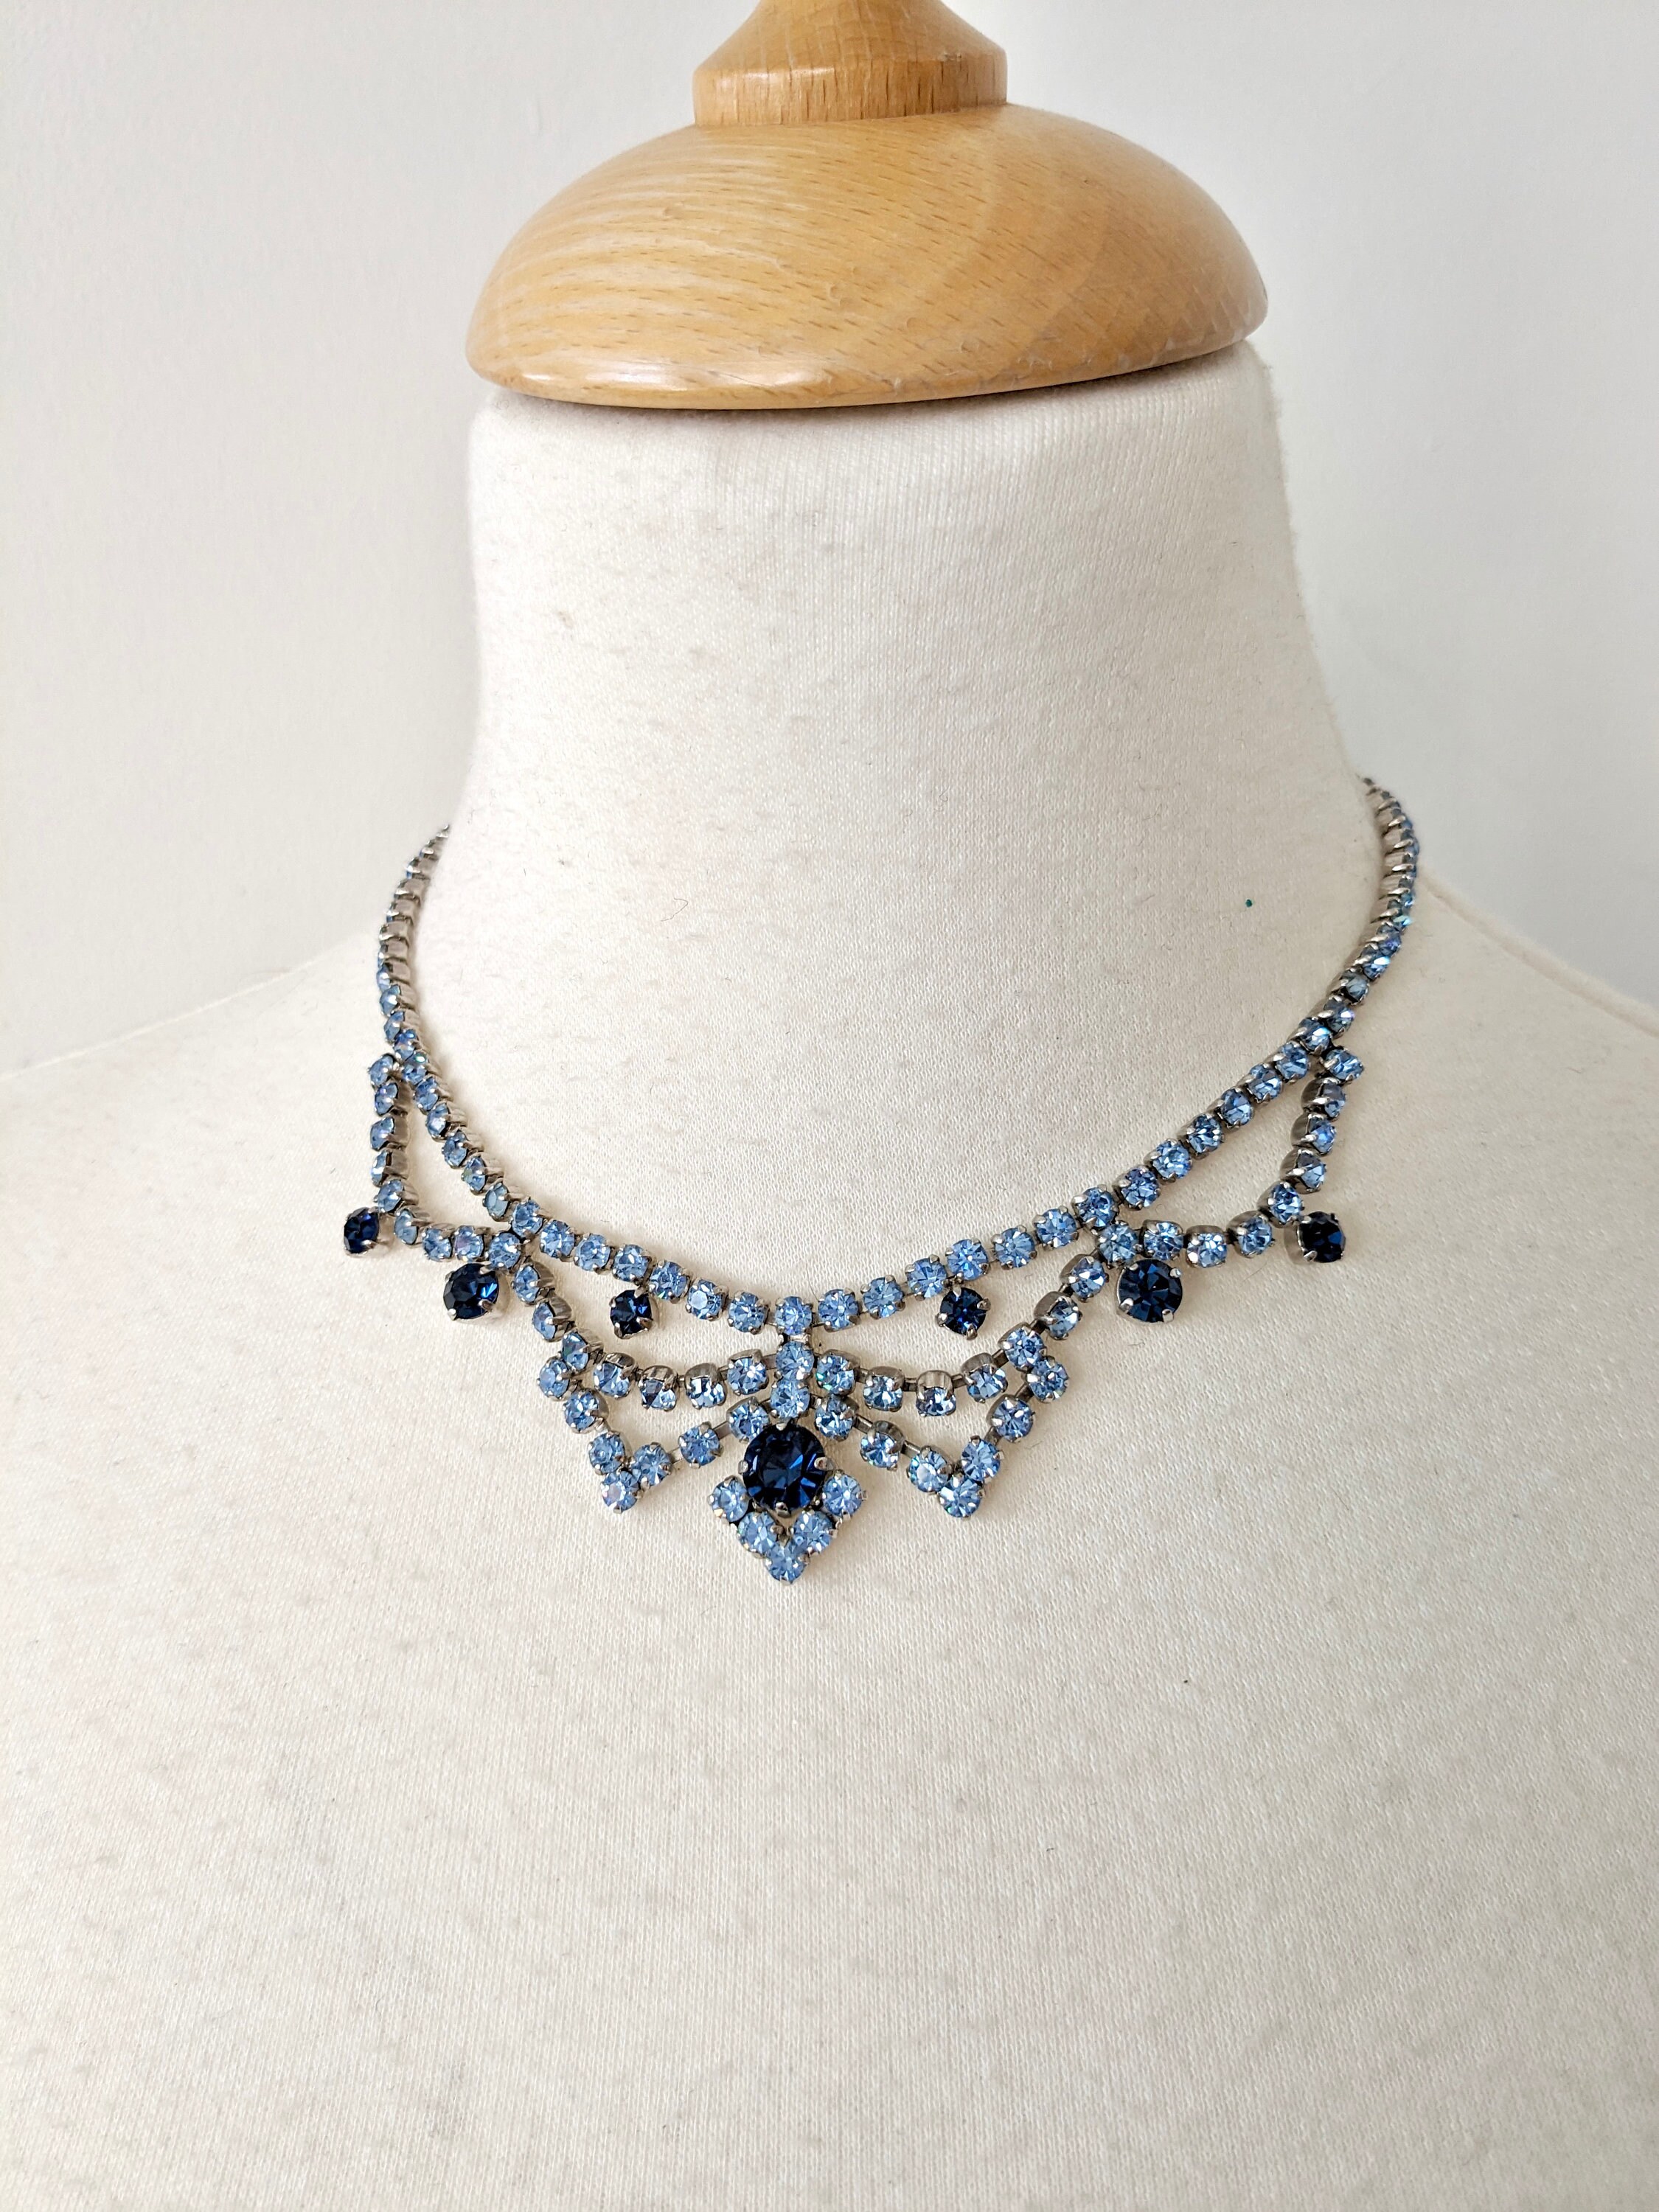 Vibrant Blue rhinestones Necklace / Brooch 2.3x1.5 * Perfect for holiday,  gifts